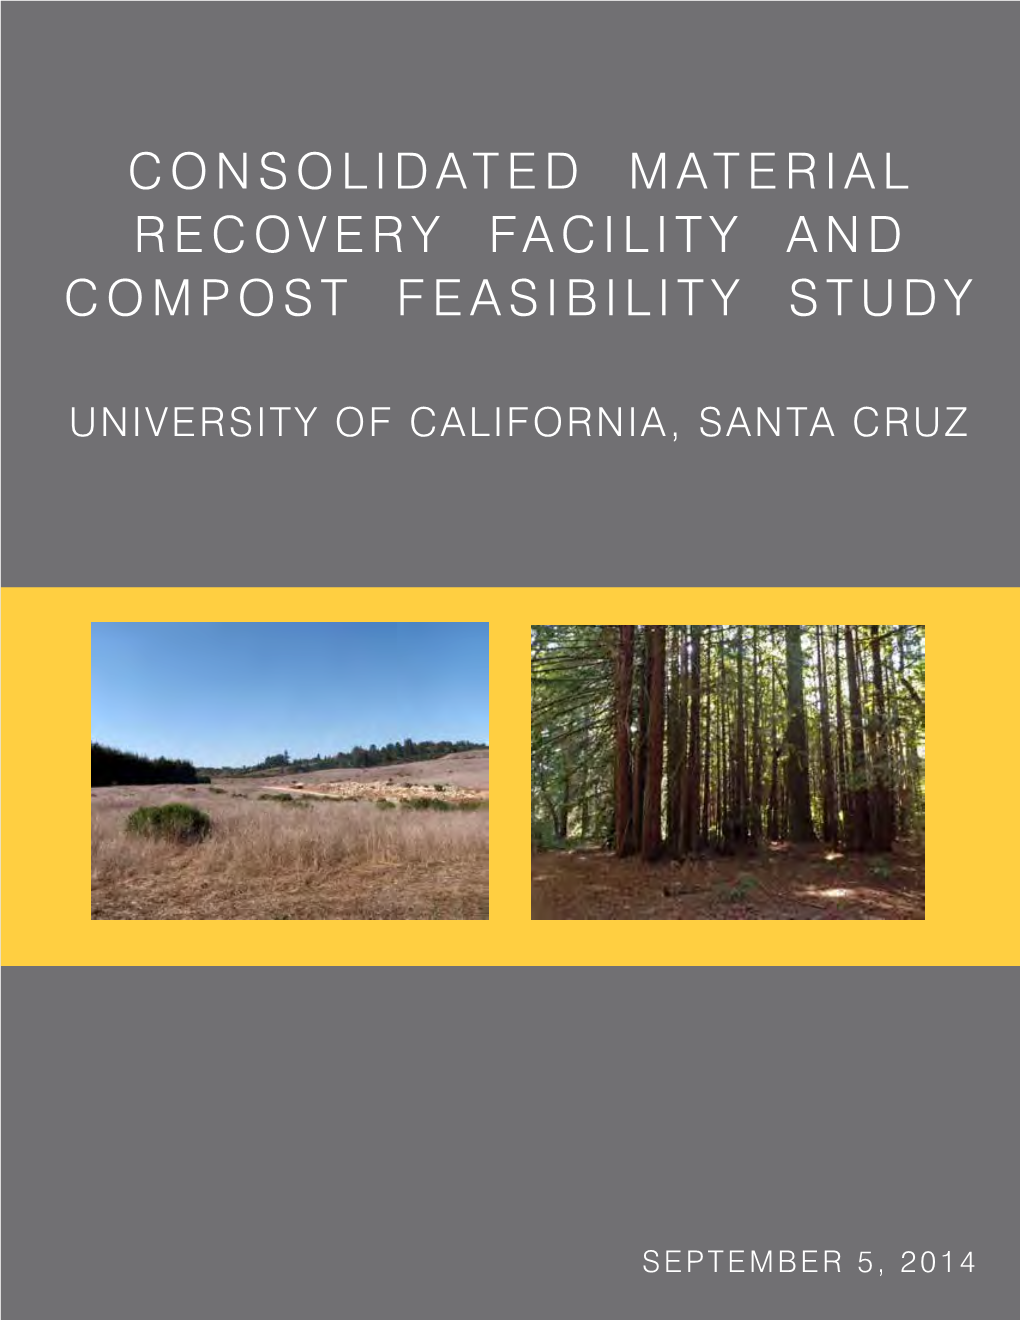 Consolidated Material Recovery Facility and Compost Feasibility Study